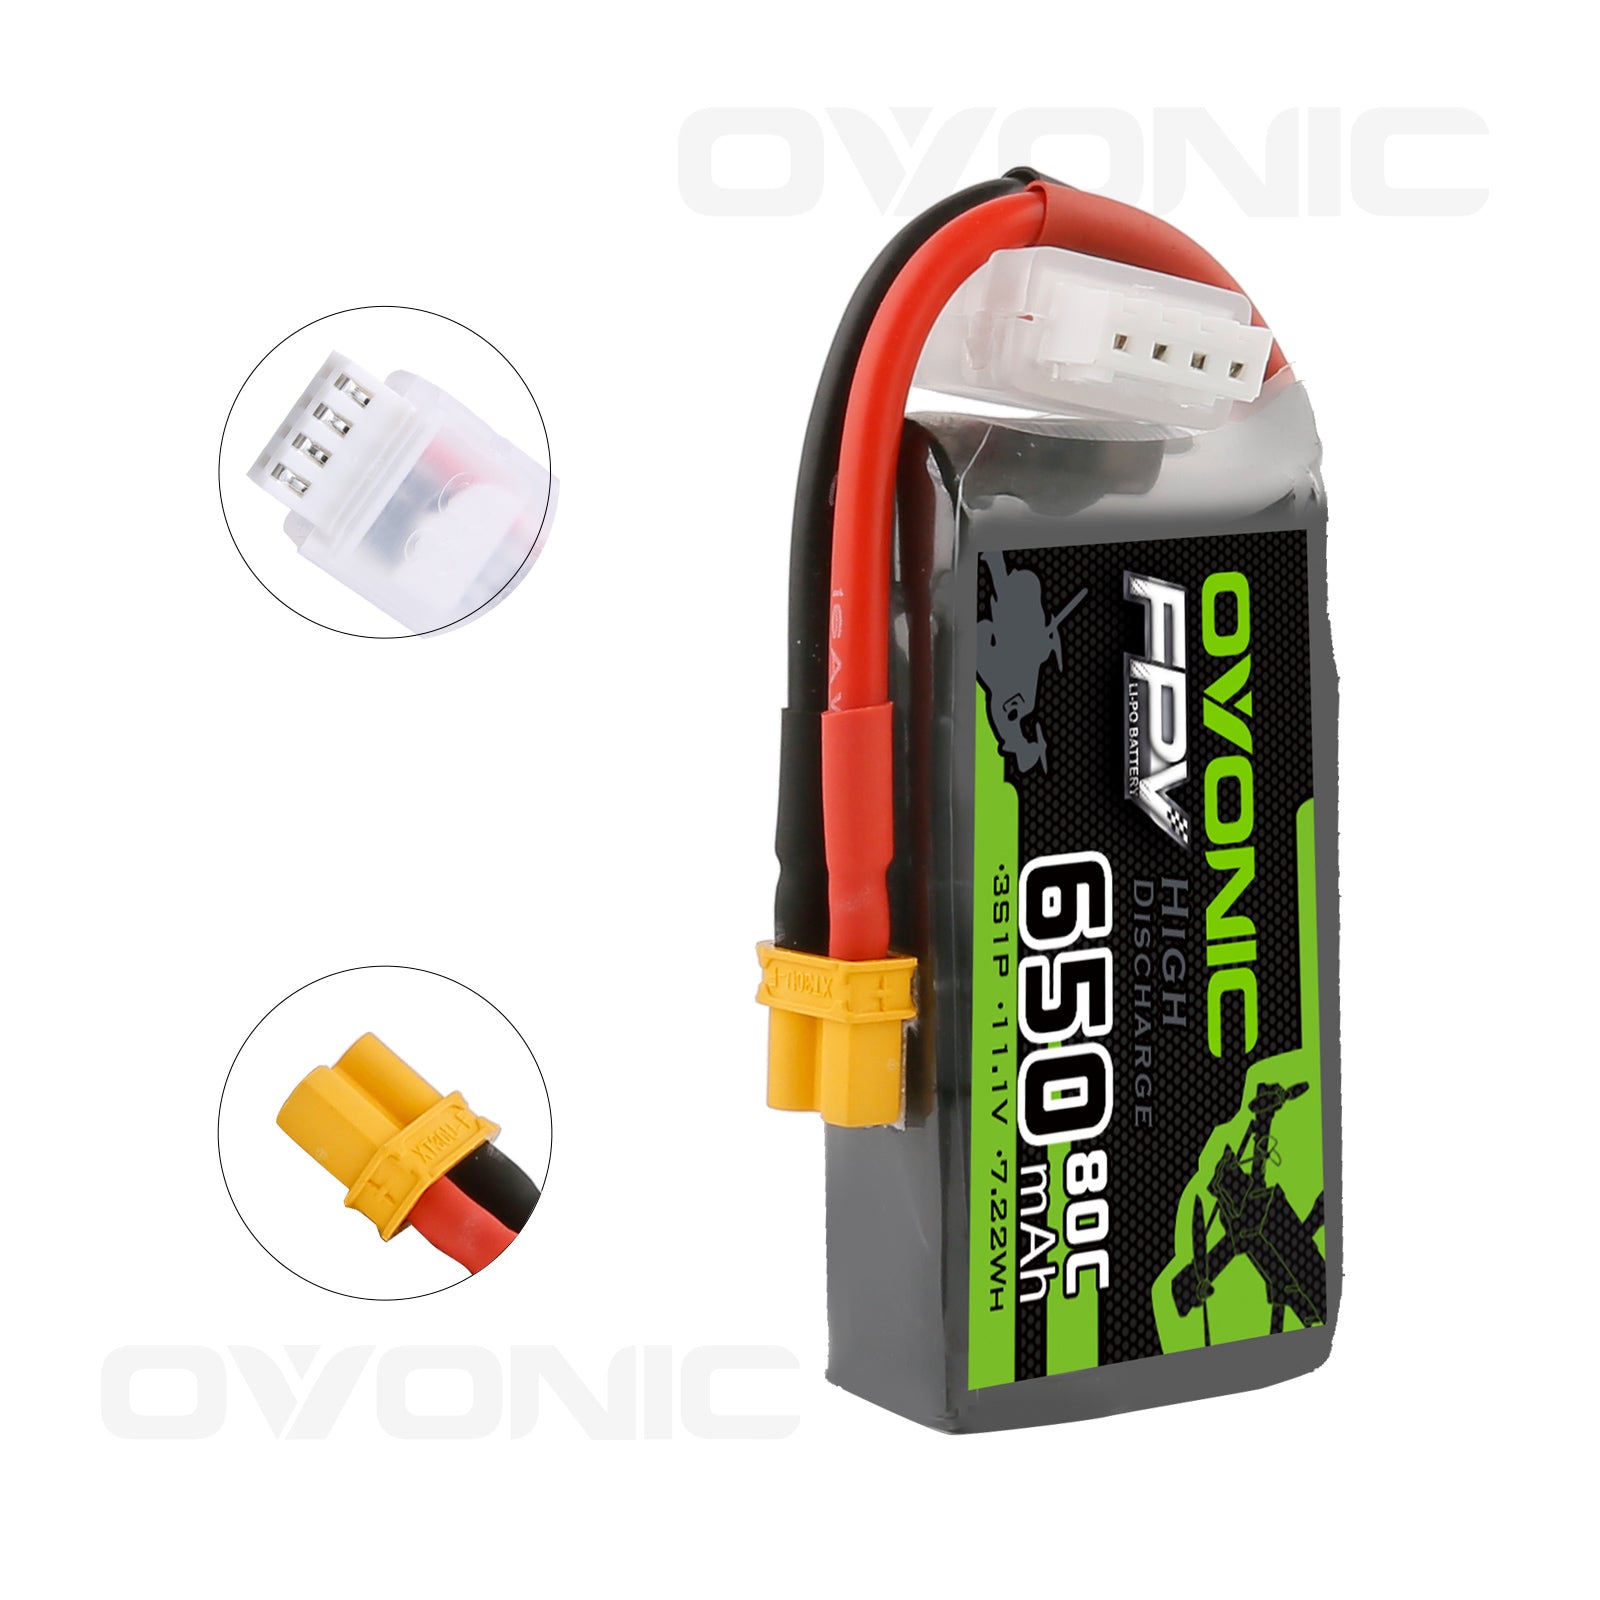 4×Ovonic 650mah 3S 11.1V 80C Lipo Battery Pack with XT30 Plug for Small FPV